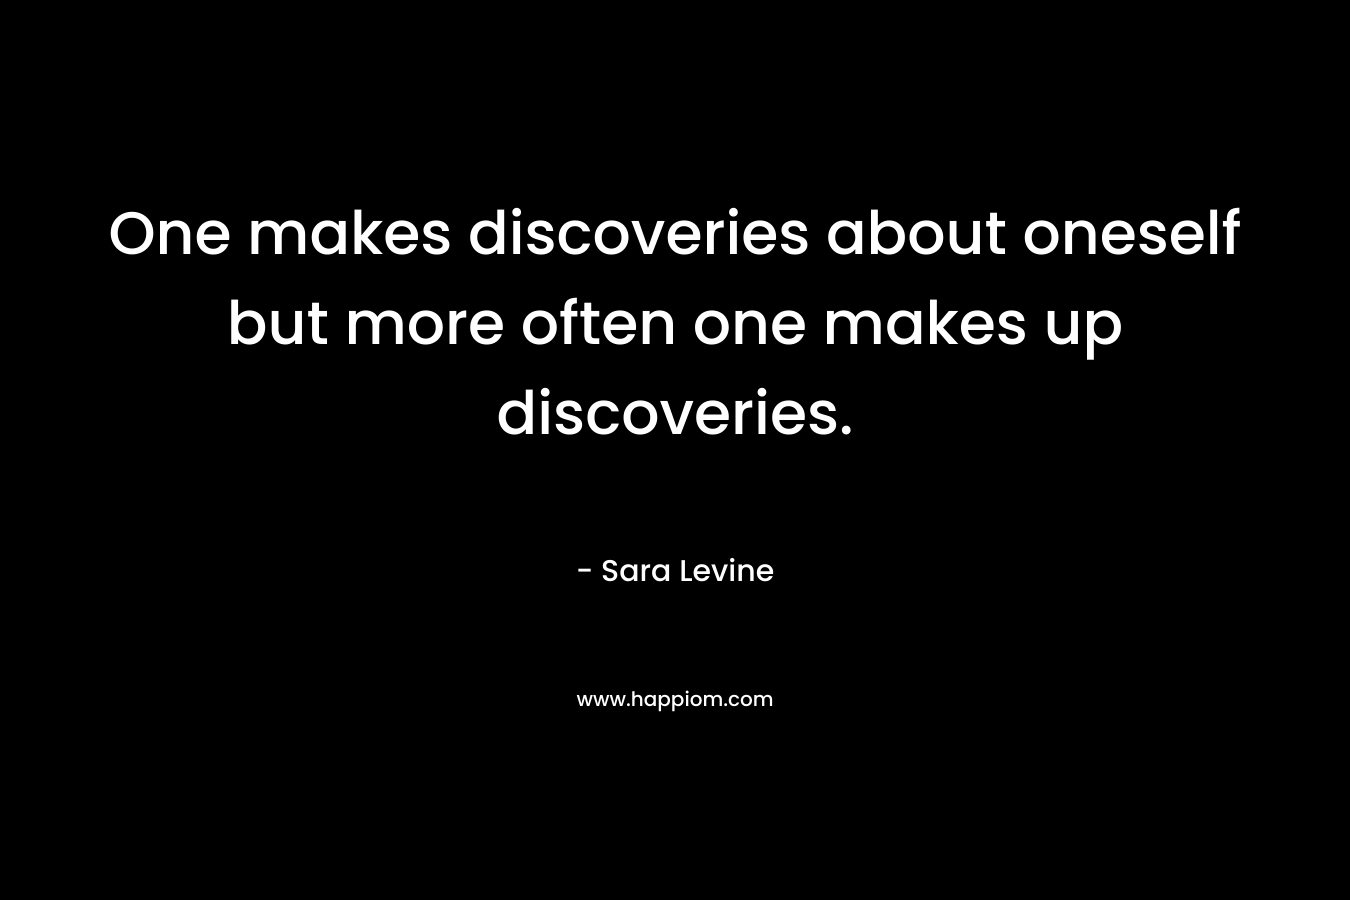 One makes discoveries about oneself but more often one makes up discoveries.